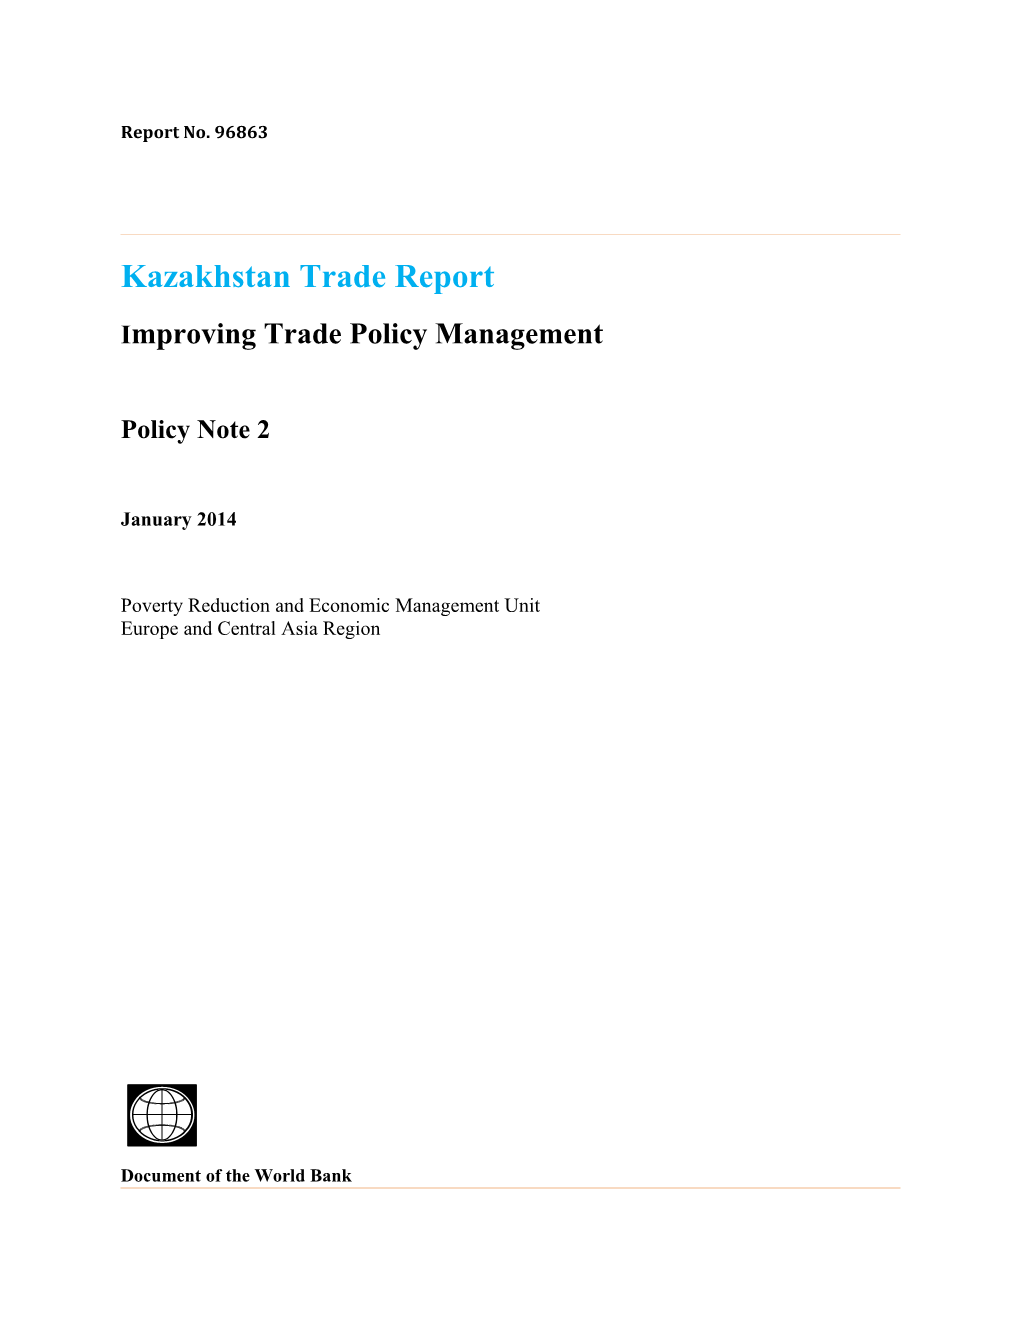 Improving Trade Policy Management